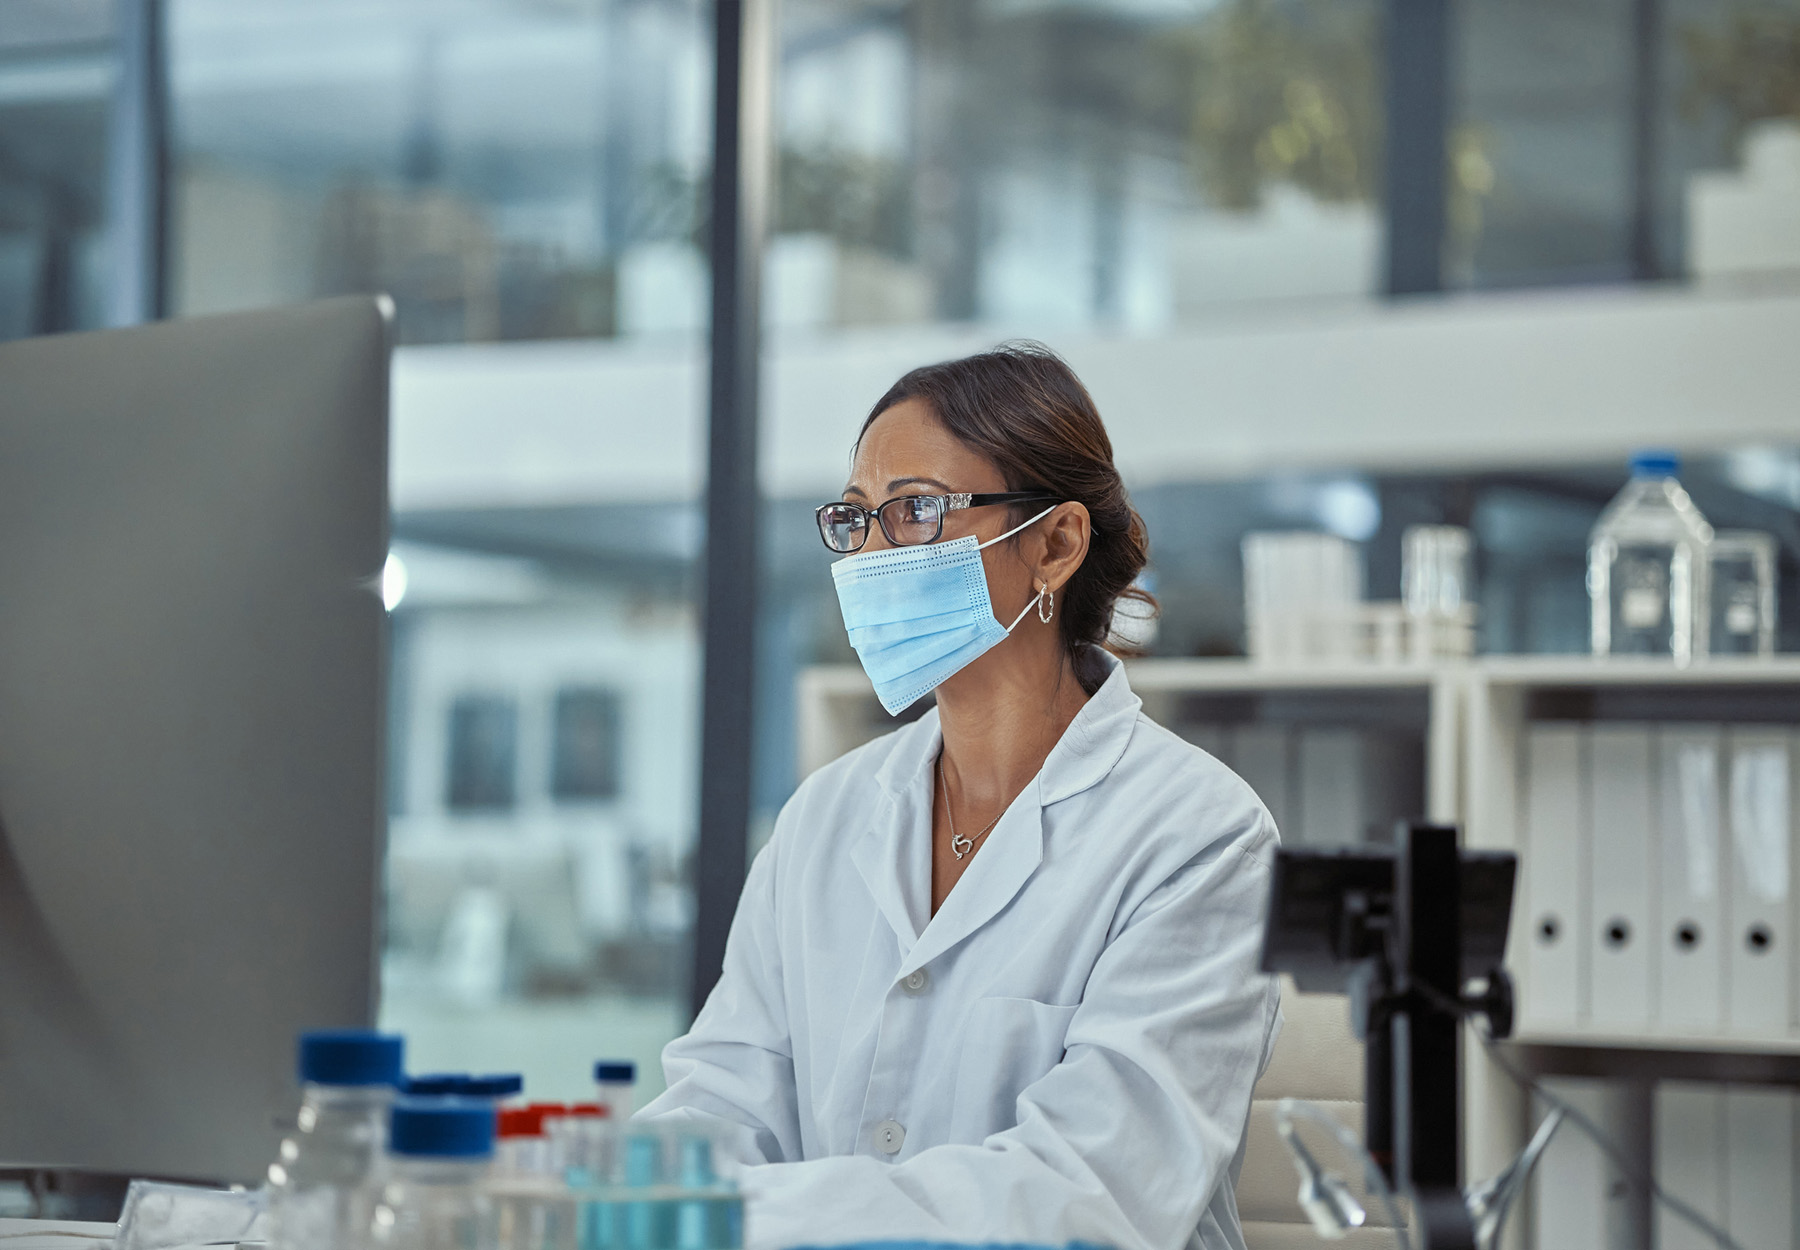 Female laboratory professional in full PPE works on a computer in the lab. iStock image.